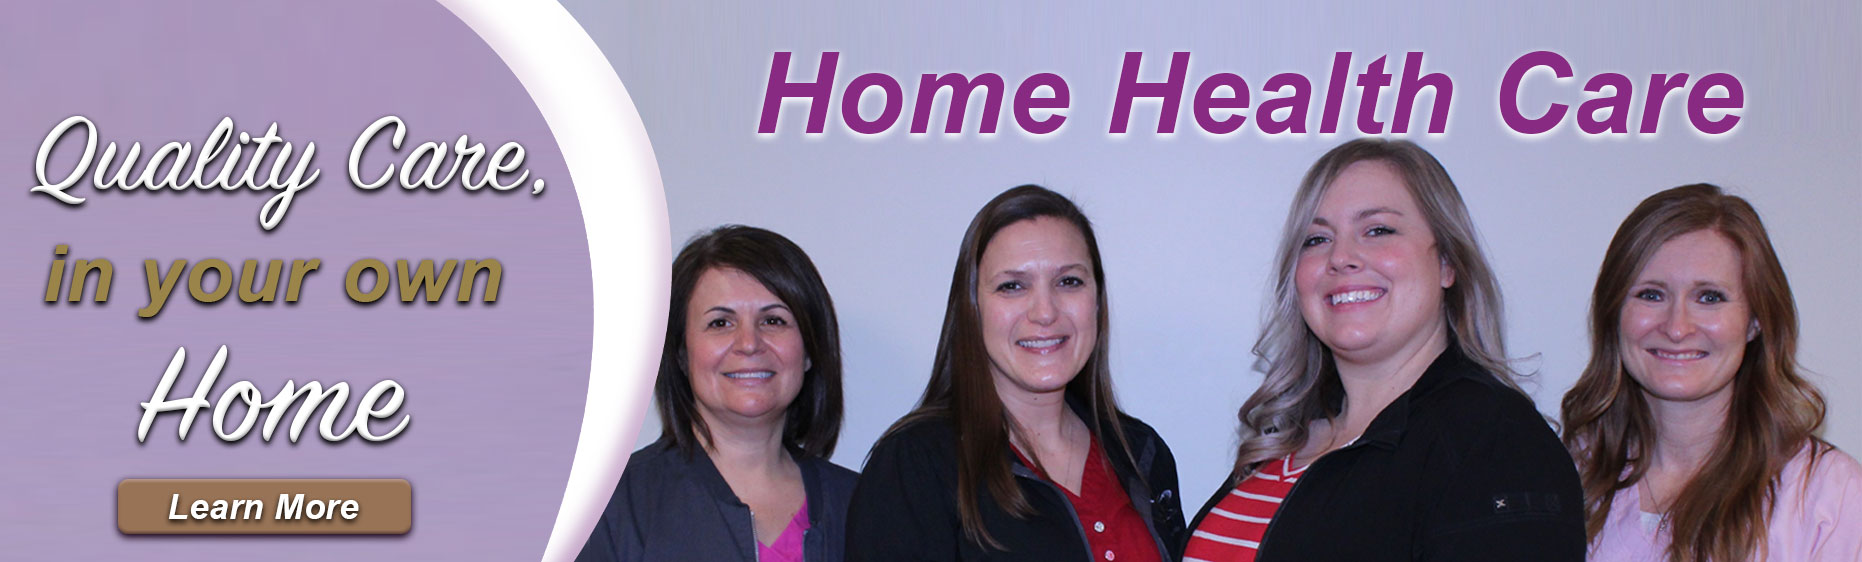 Banner picture of four female Home Health Care Nurses smiling. Banner says: Quality Care in your own home. Learn More. Home Health Care.